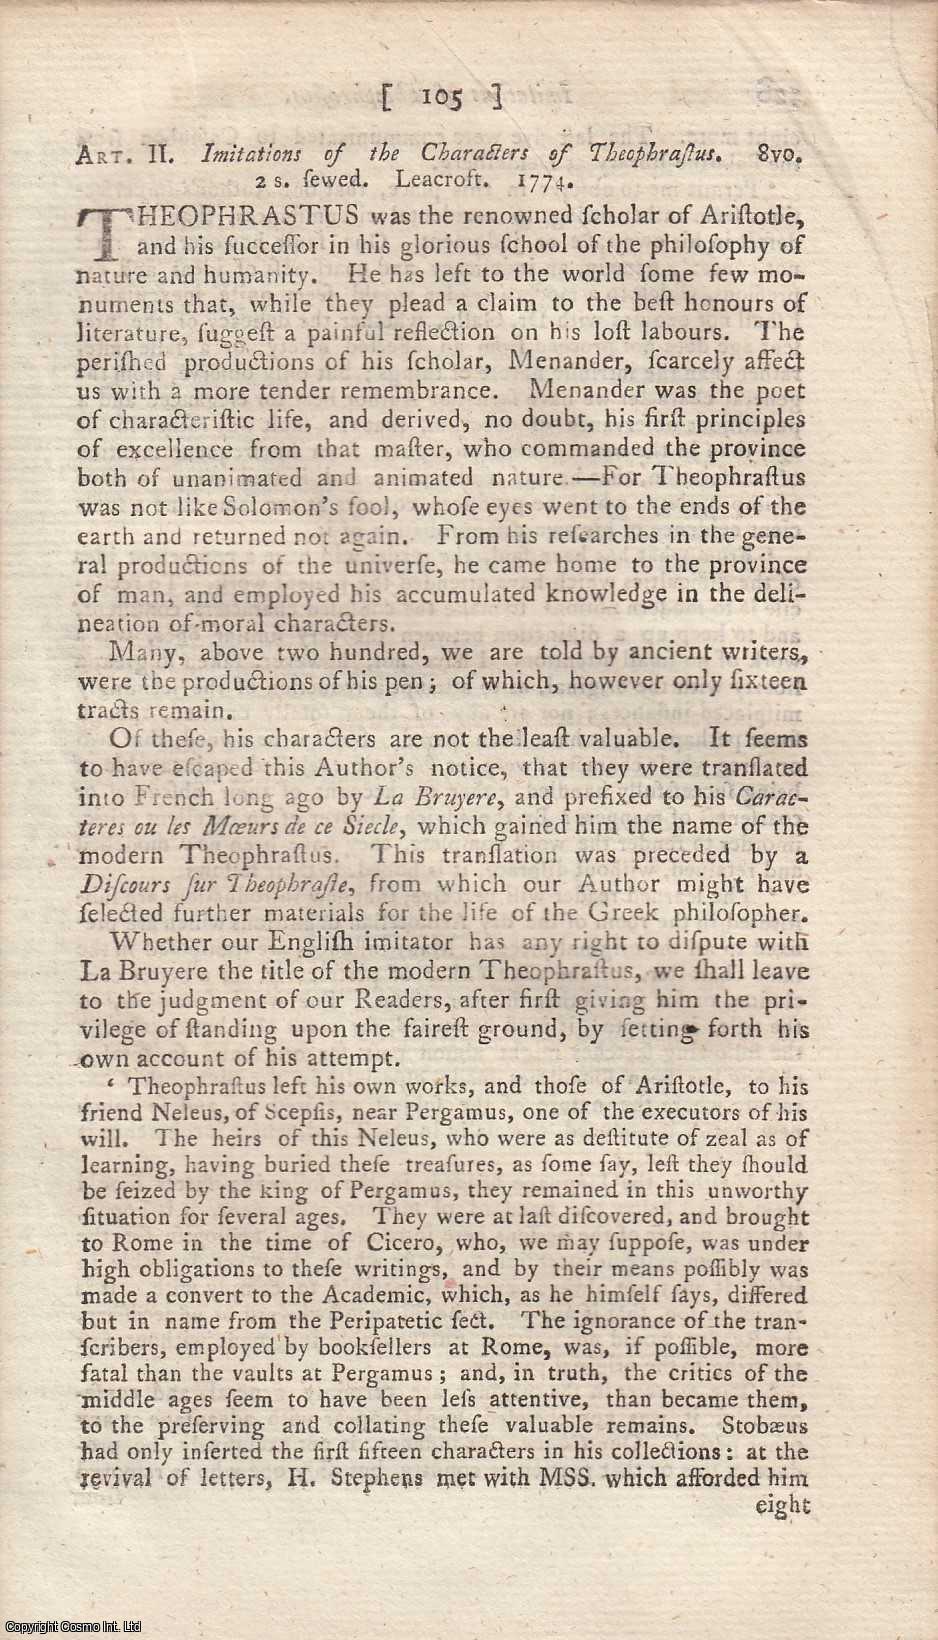 Author Not Stated - Imitations of The Characters of Theophrastus. An original article from the Monthly Review, 1775.